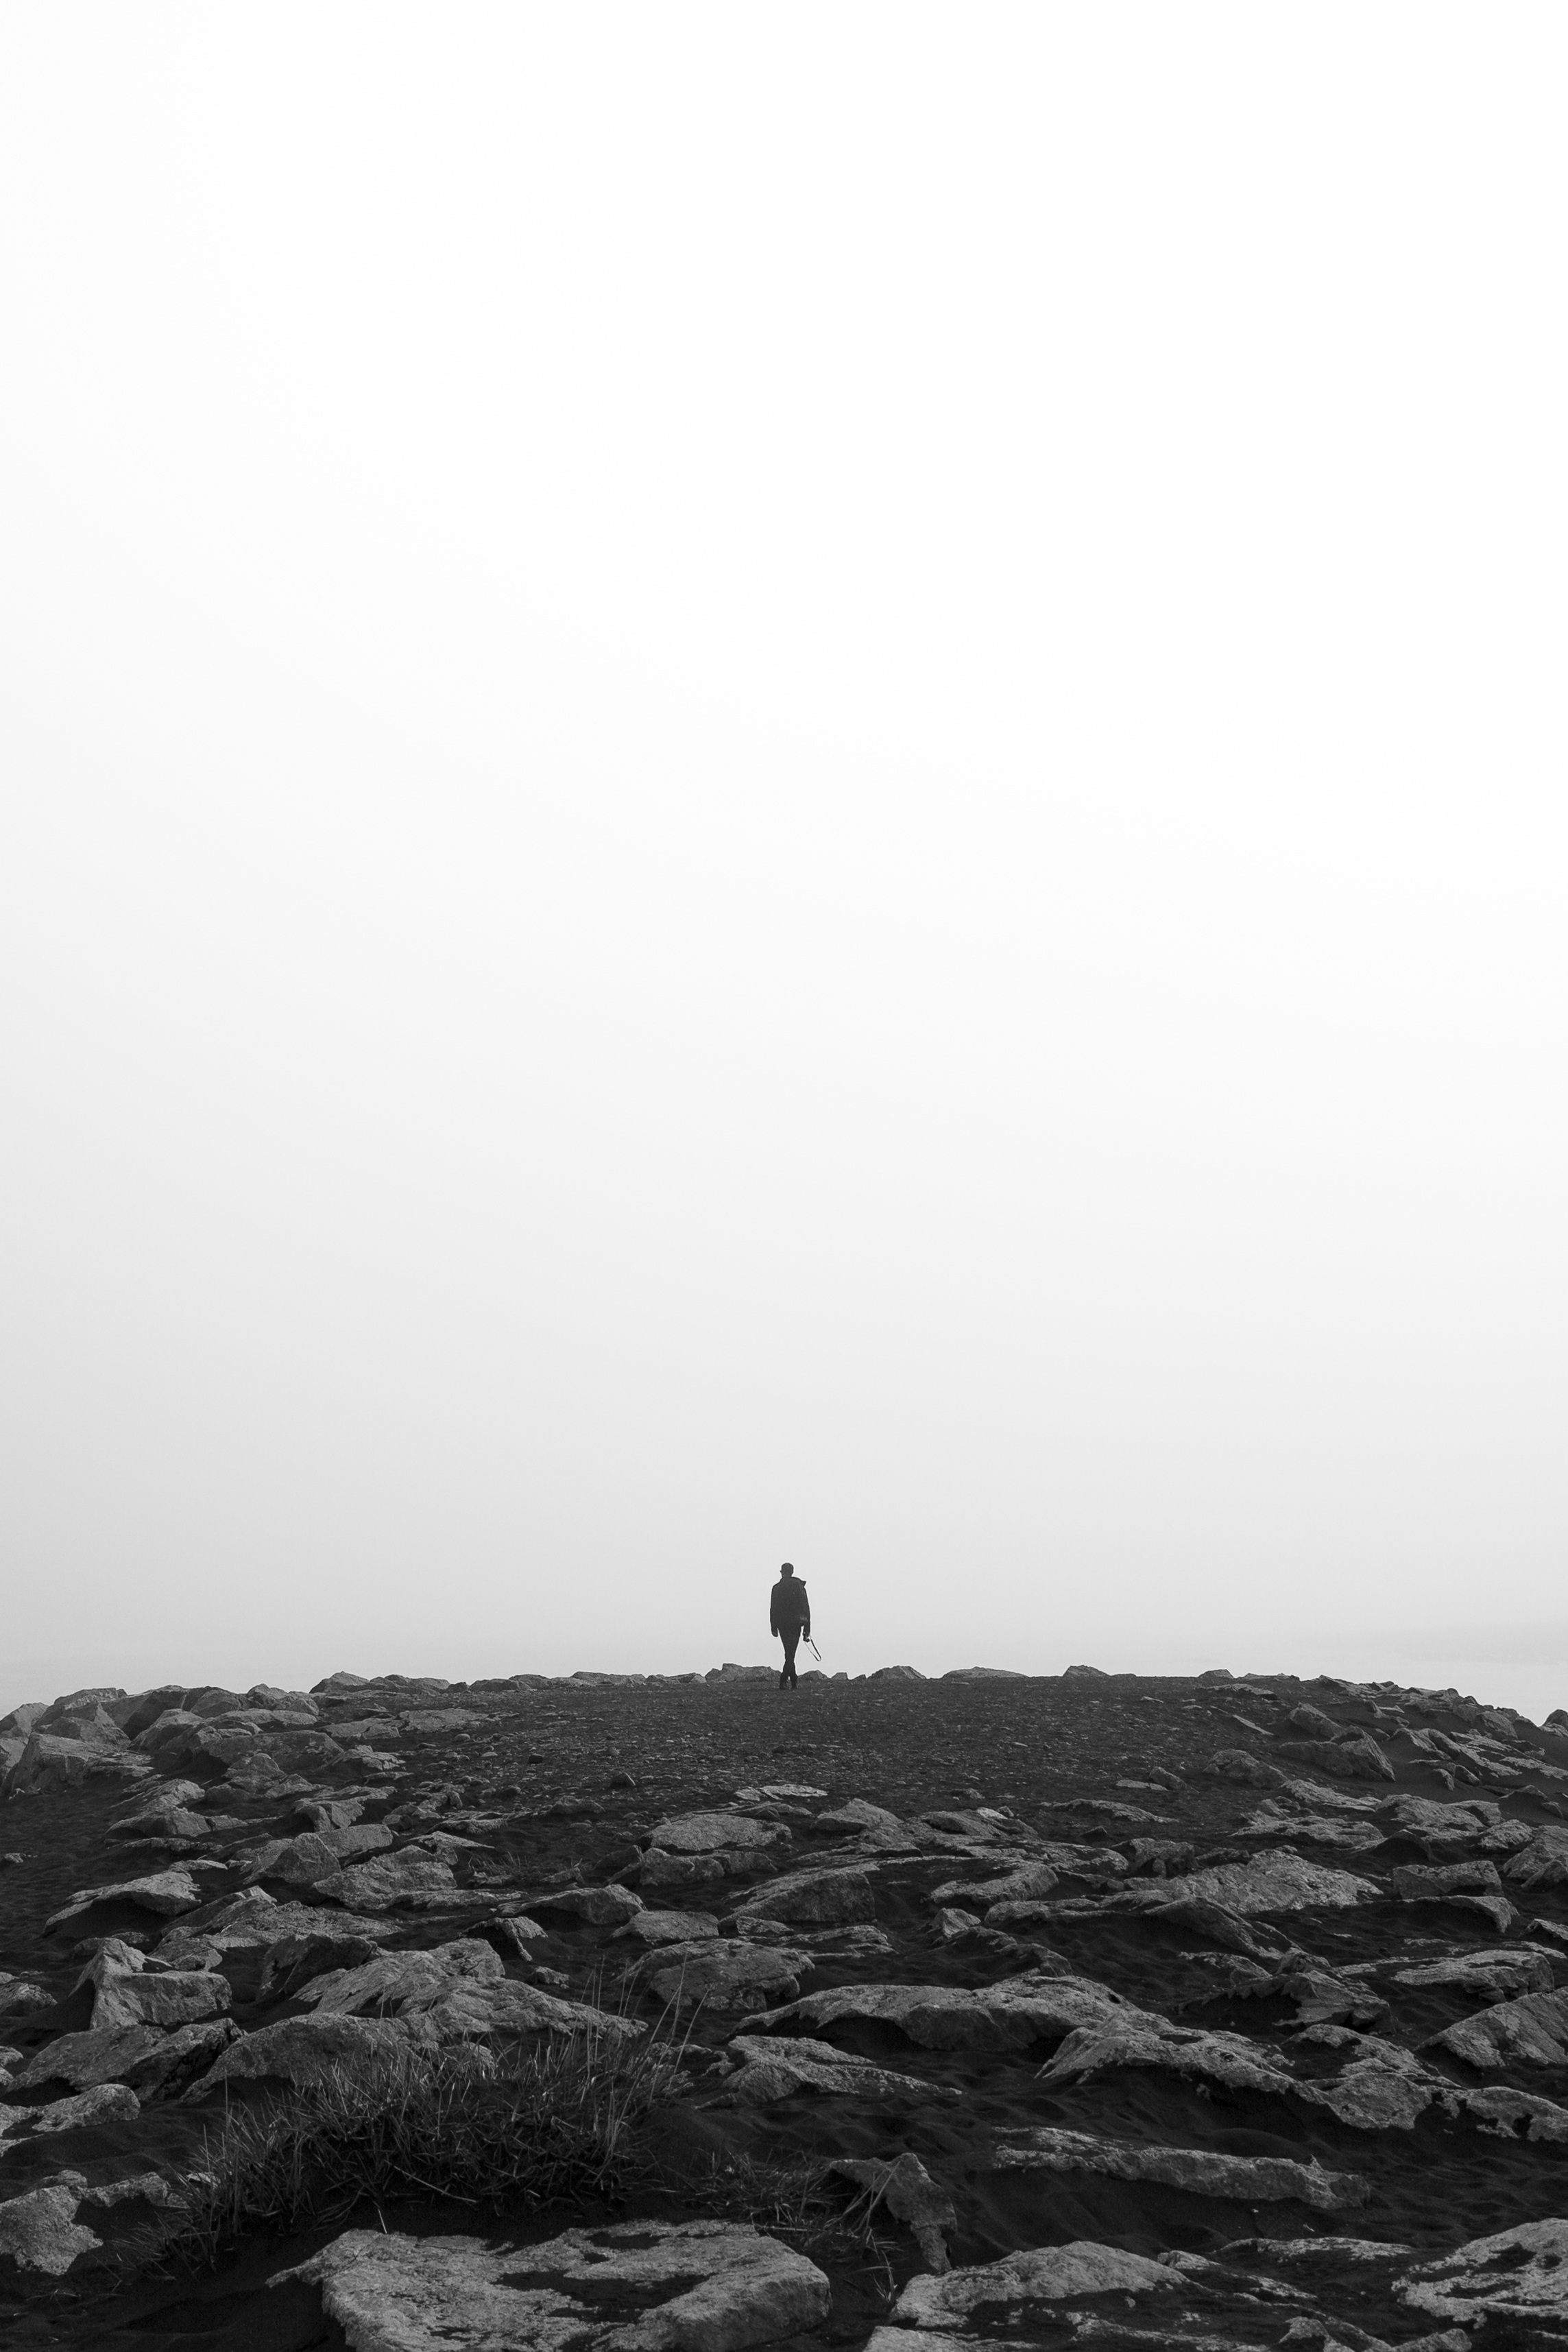 android bw, minimalism, loneliness, stones, horizon, privacy, seclusion, chb